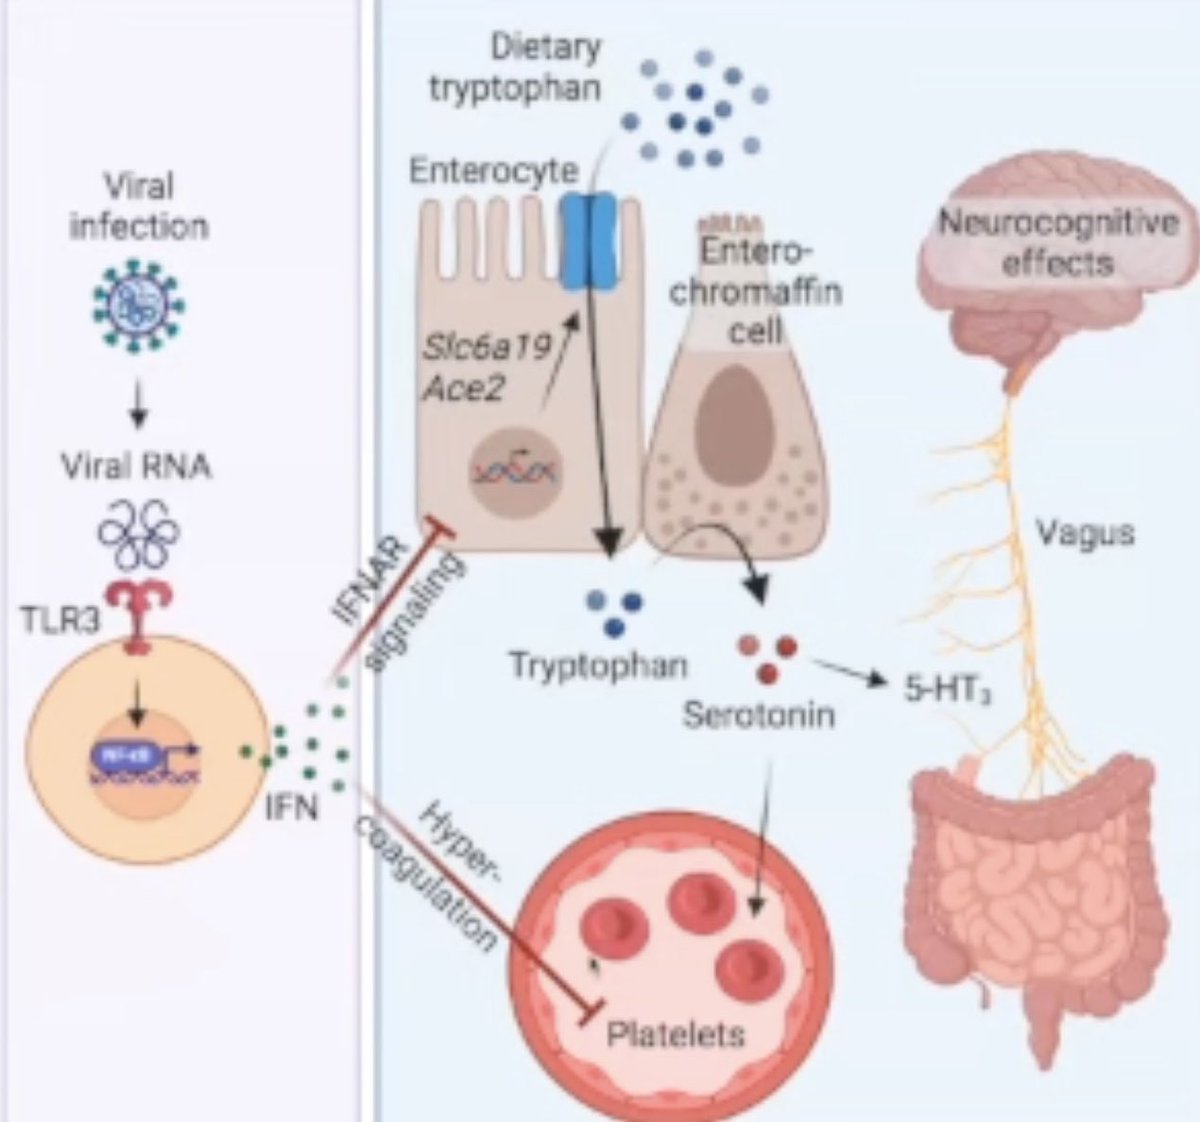 Interferon’s role in serotonin reduction in chronic infections:

The majority of serotonin is synthesized in the gastrointestinal tract from dietary tryptophan. Tryptophan uptake is facilitated by a complex of amino acid transporters, with ACE2 acting as a chaperone for this